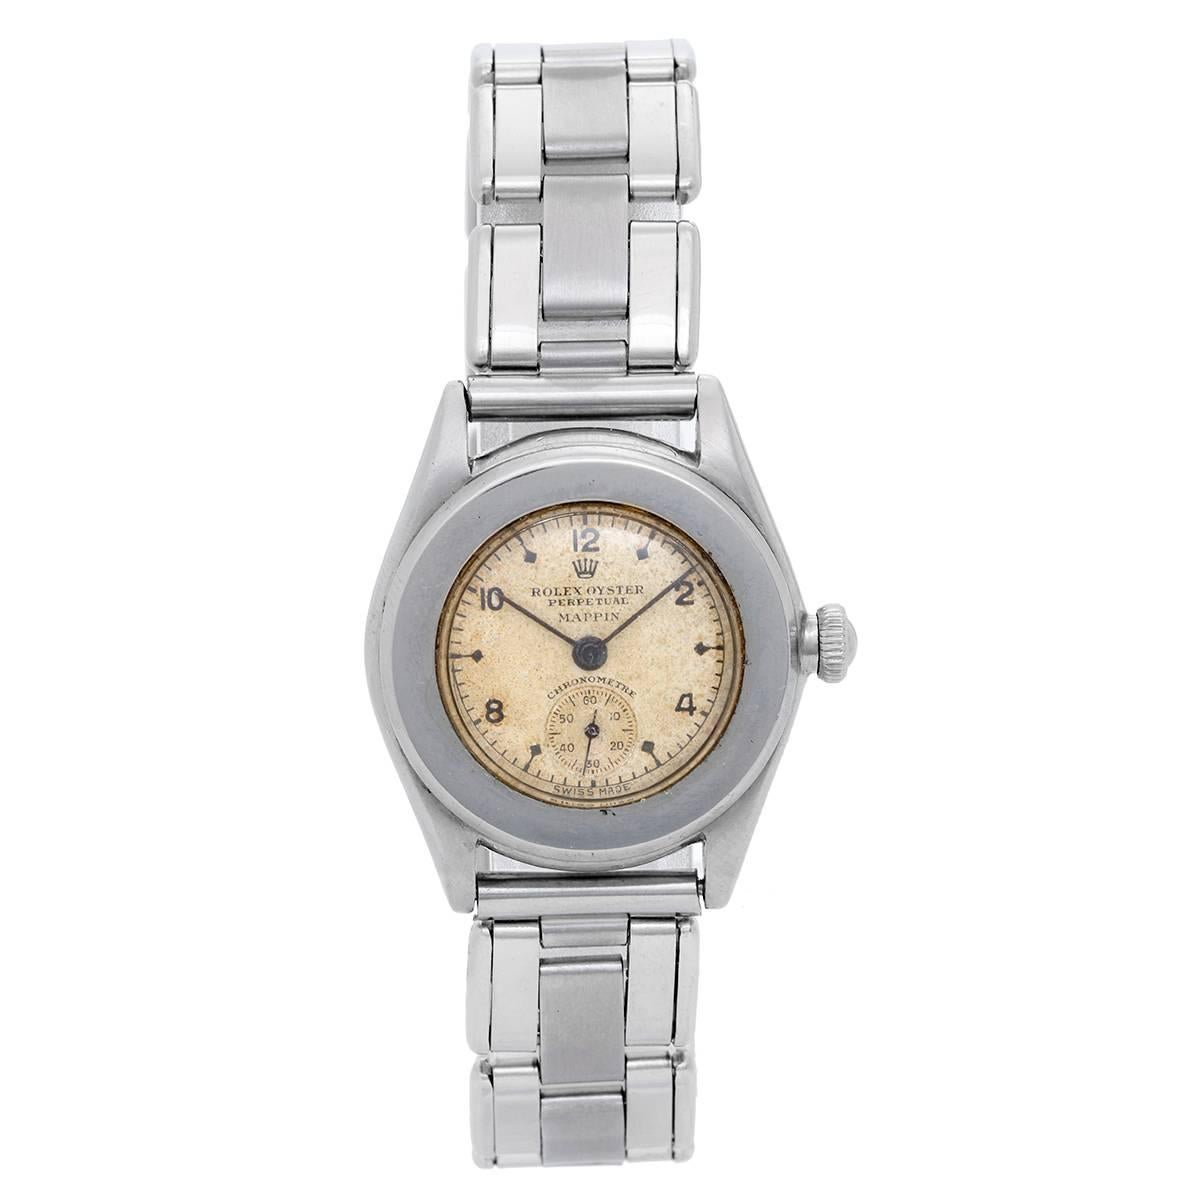 Rolex Stainless Steel Midsize Oyster Perpetual Automatic Wristwatch, Circa 1940s